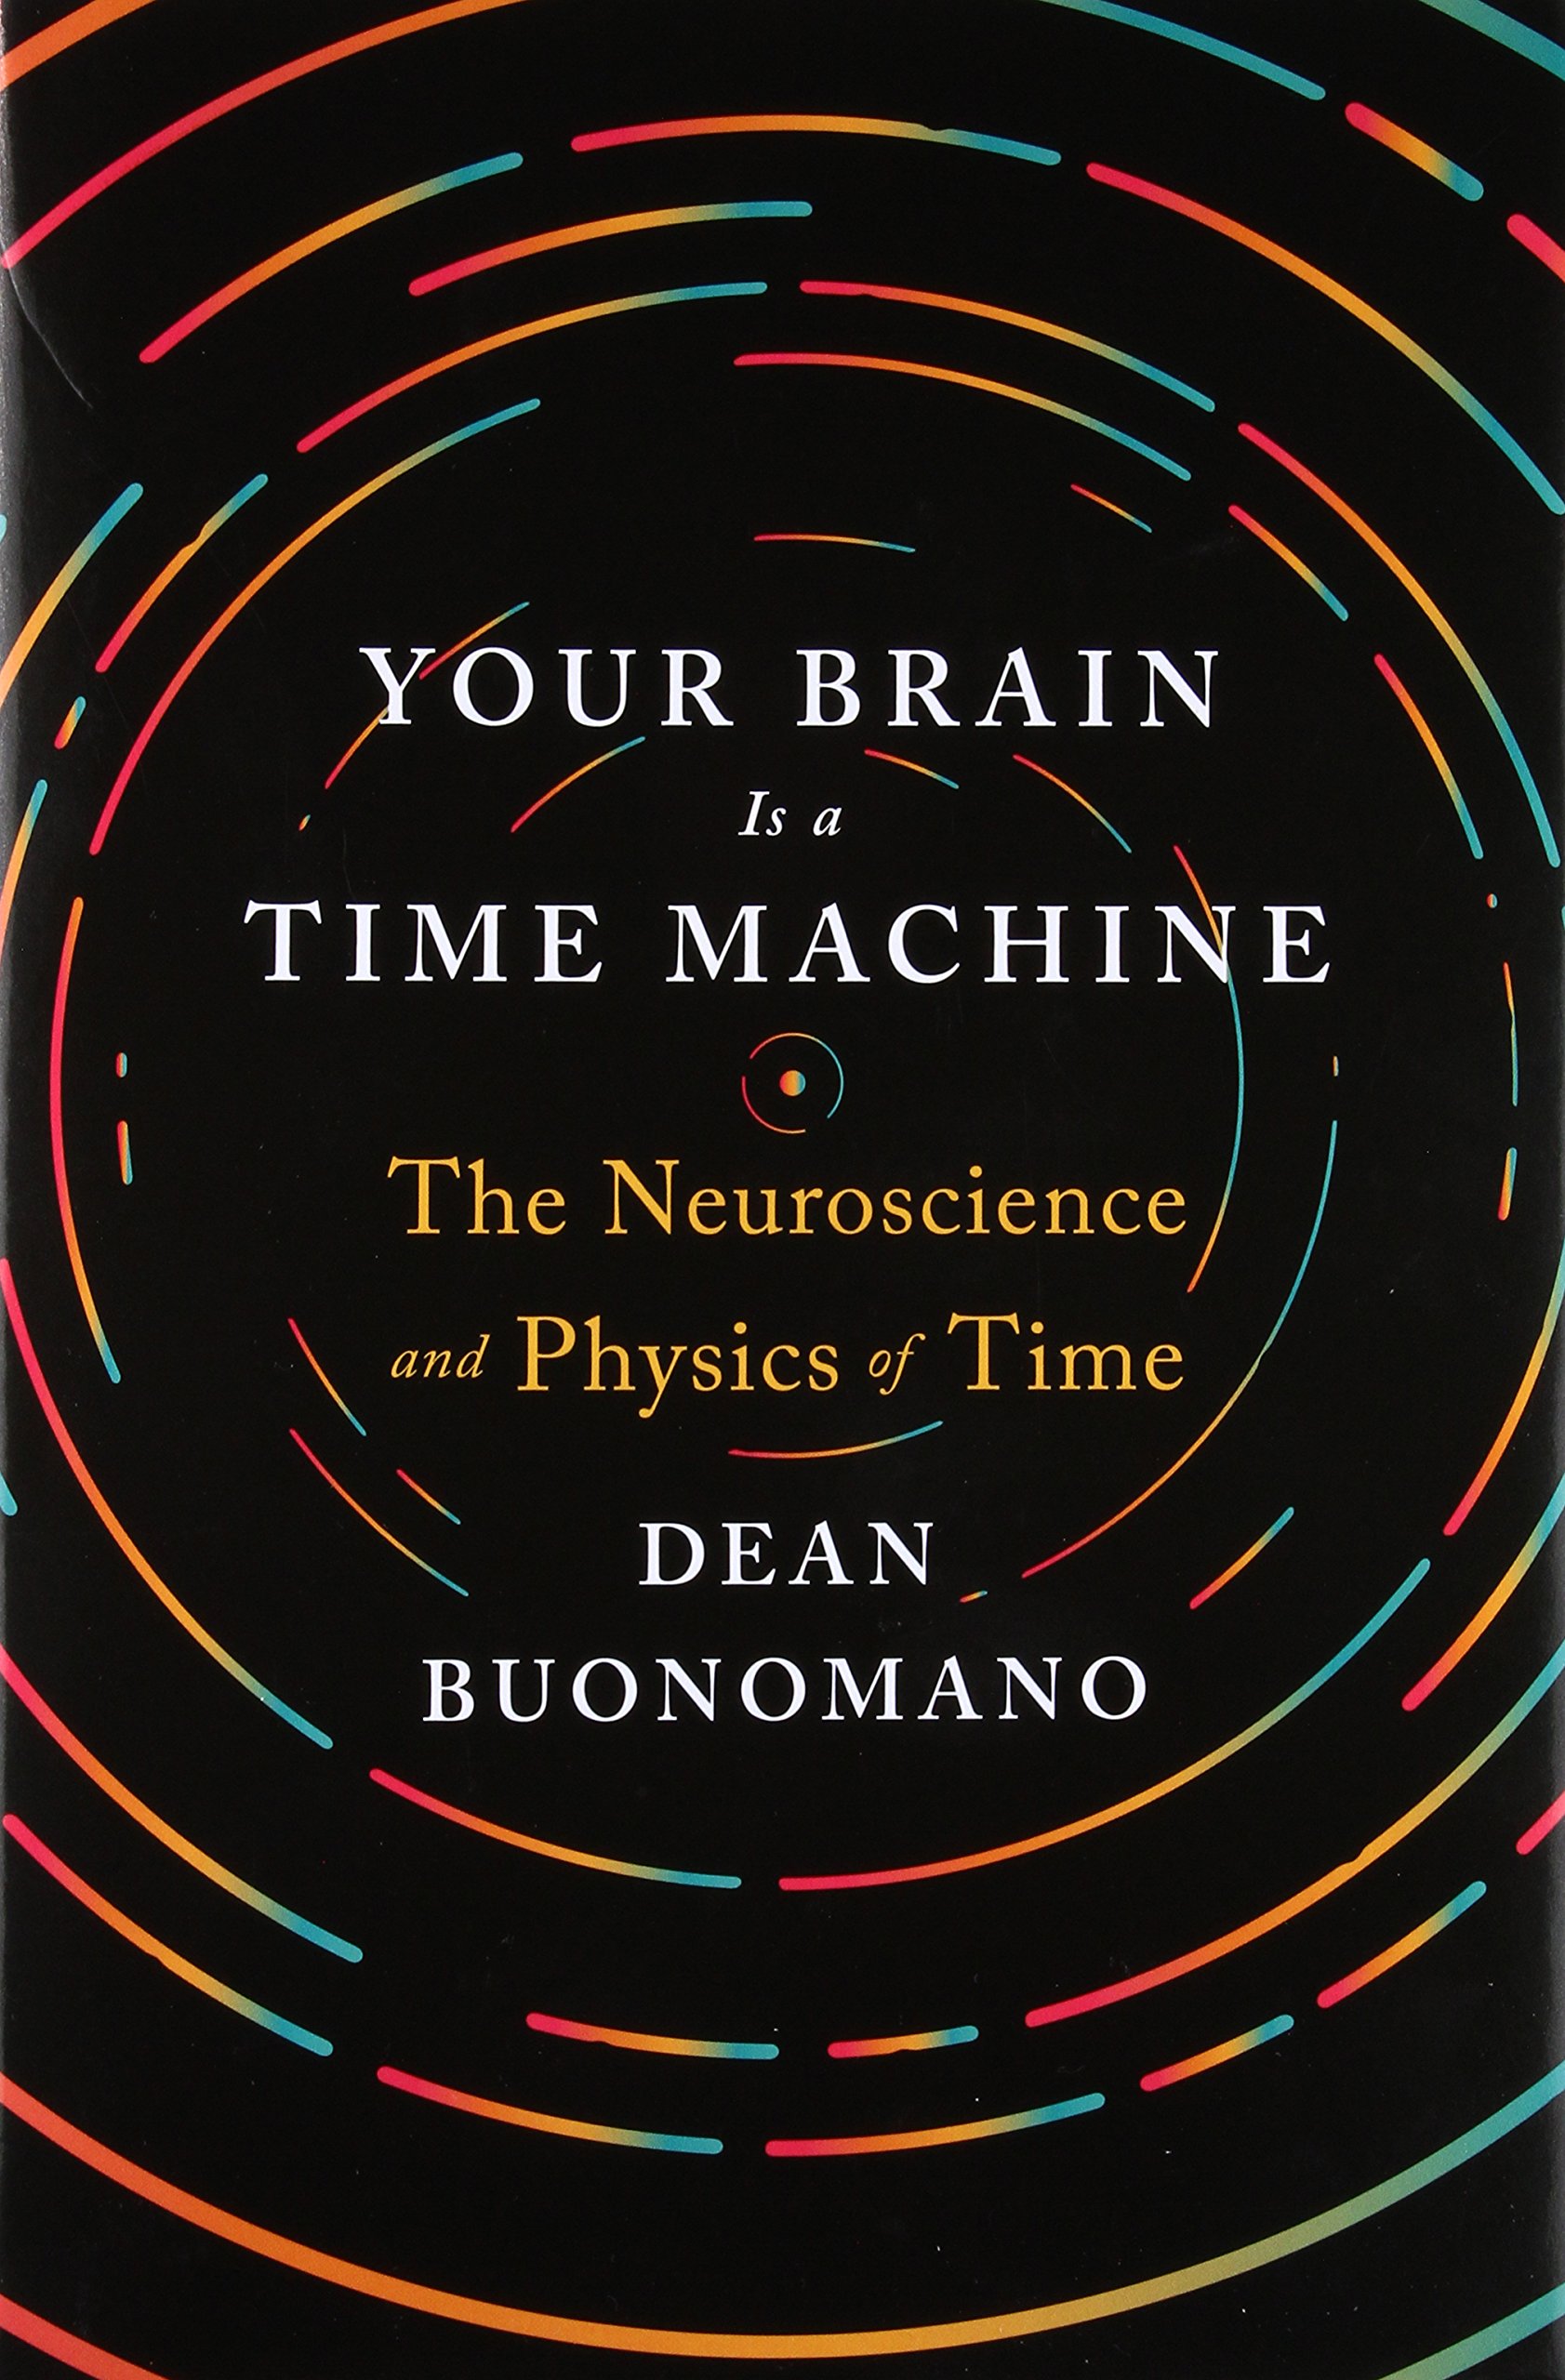 22.Your Brain is a Time Machine.jpg